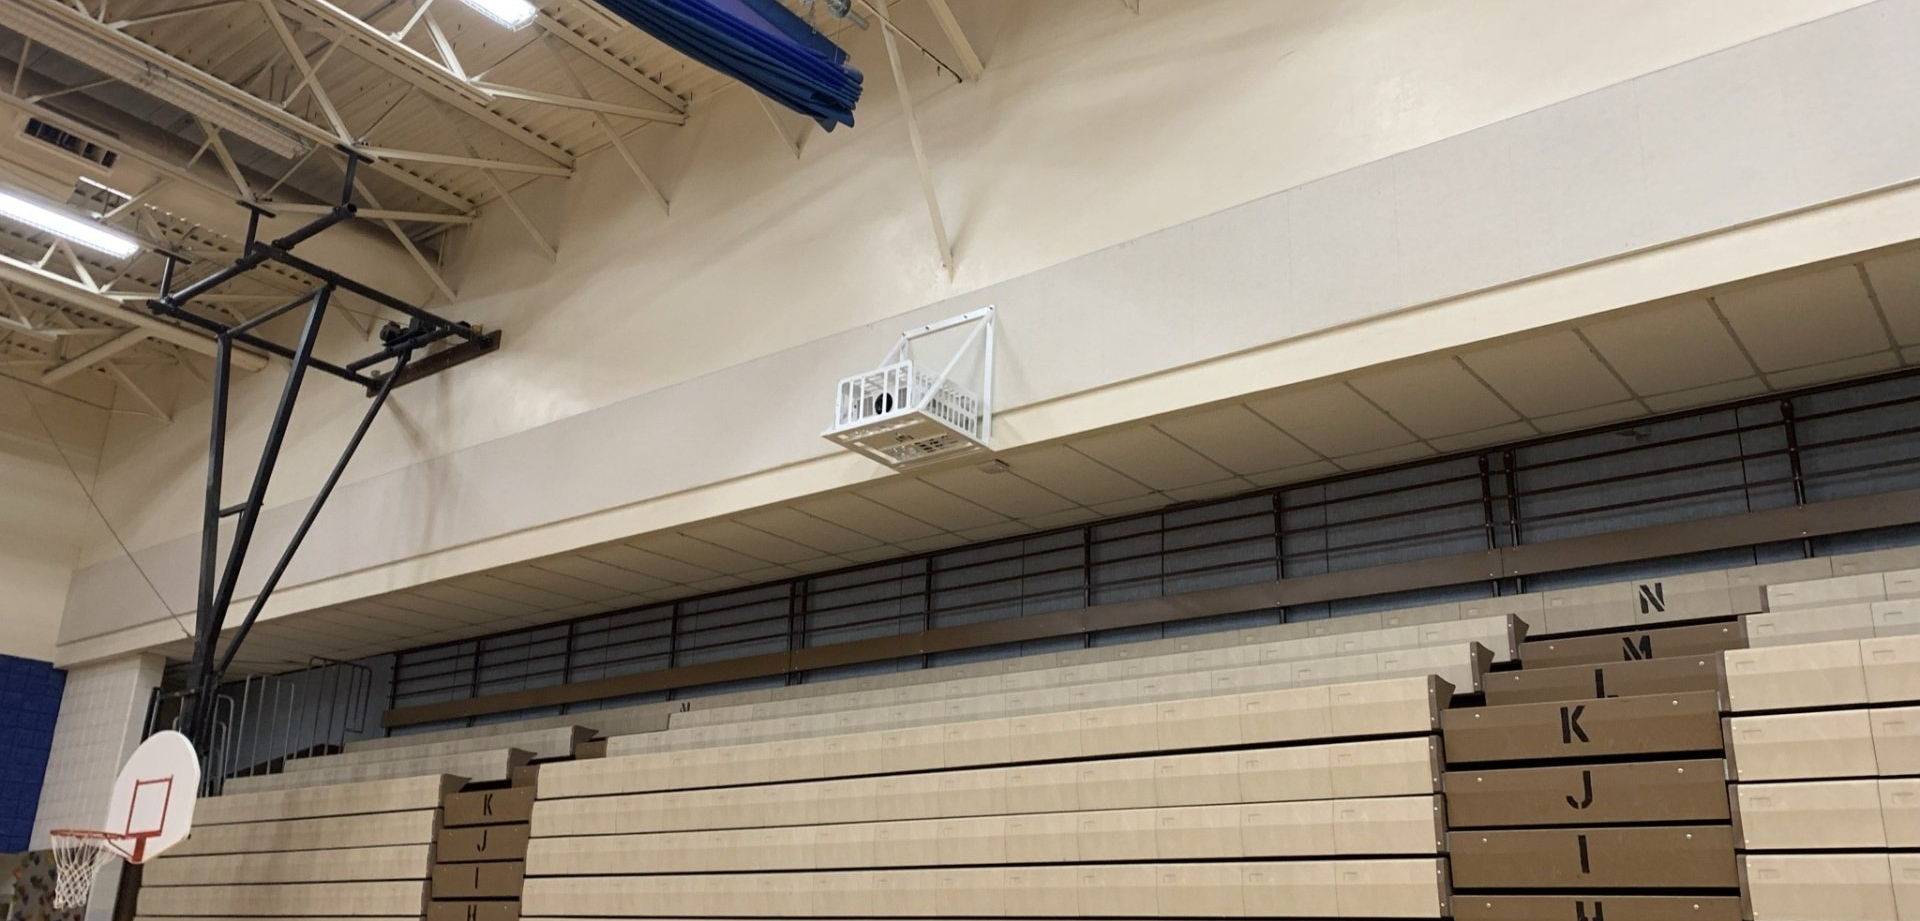 A basketball hoop is hanging from the ceiling of a gym.